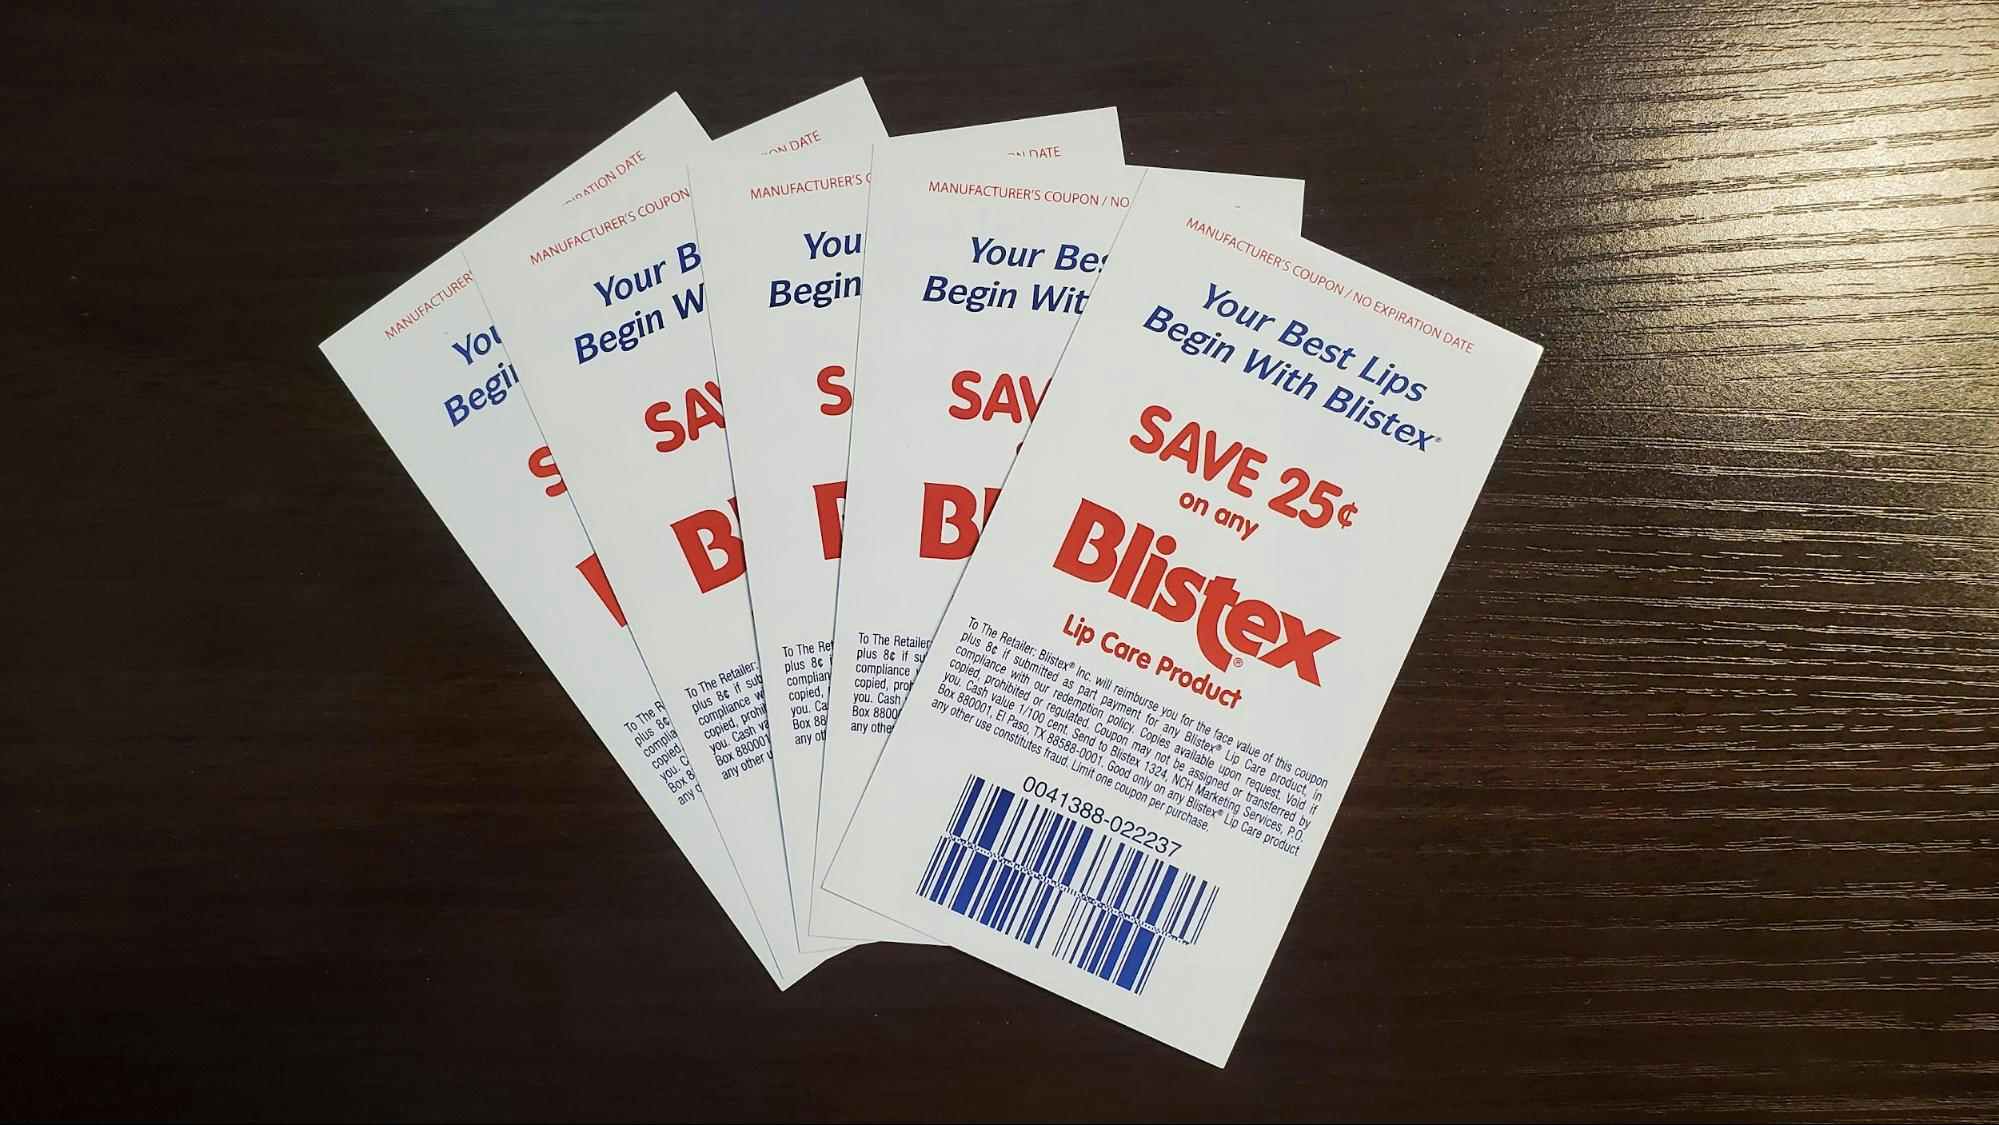 Free Blistex coupons by mail